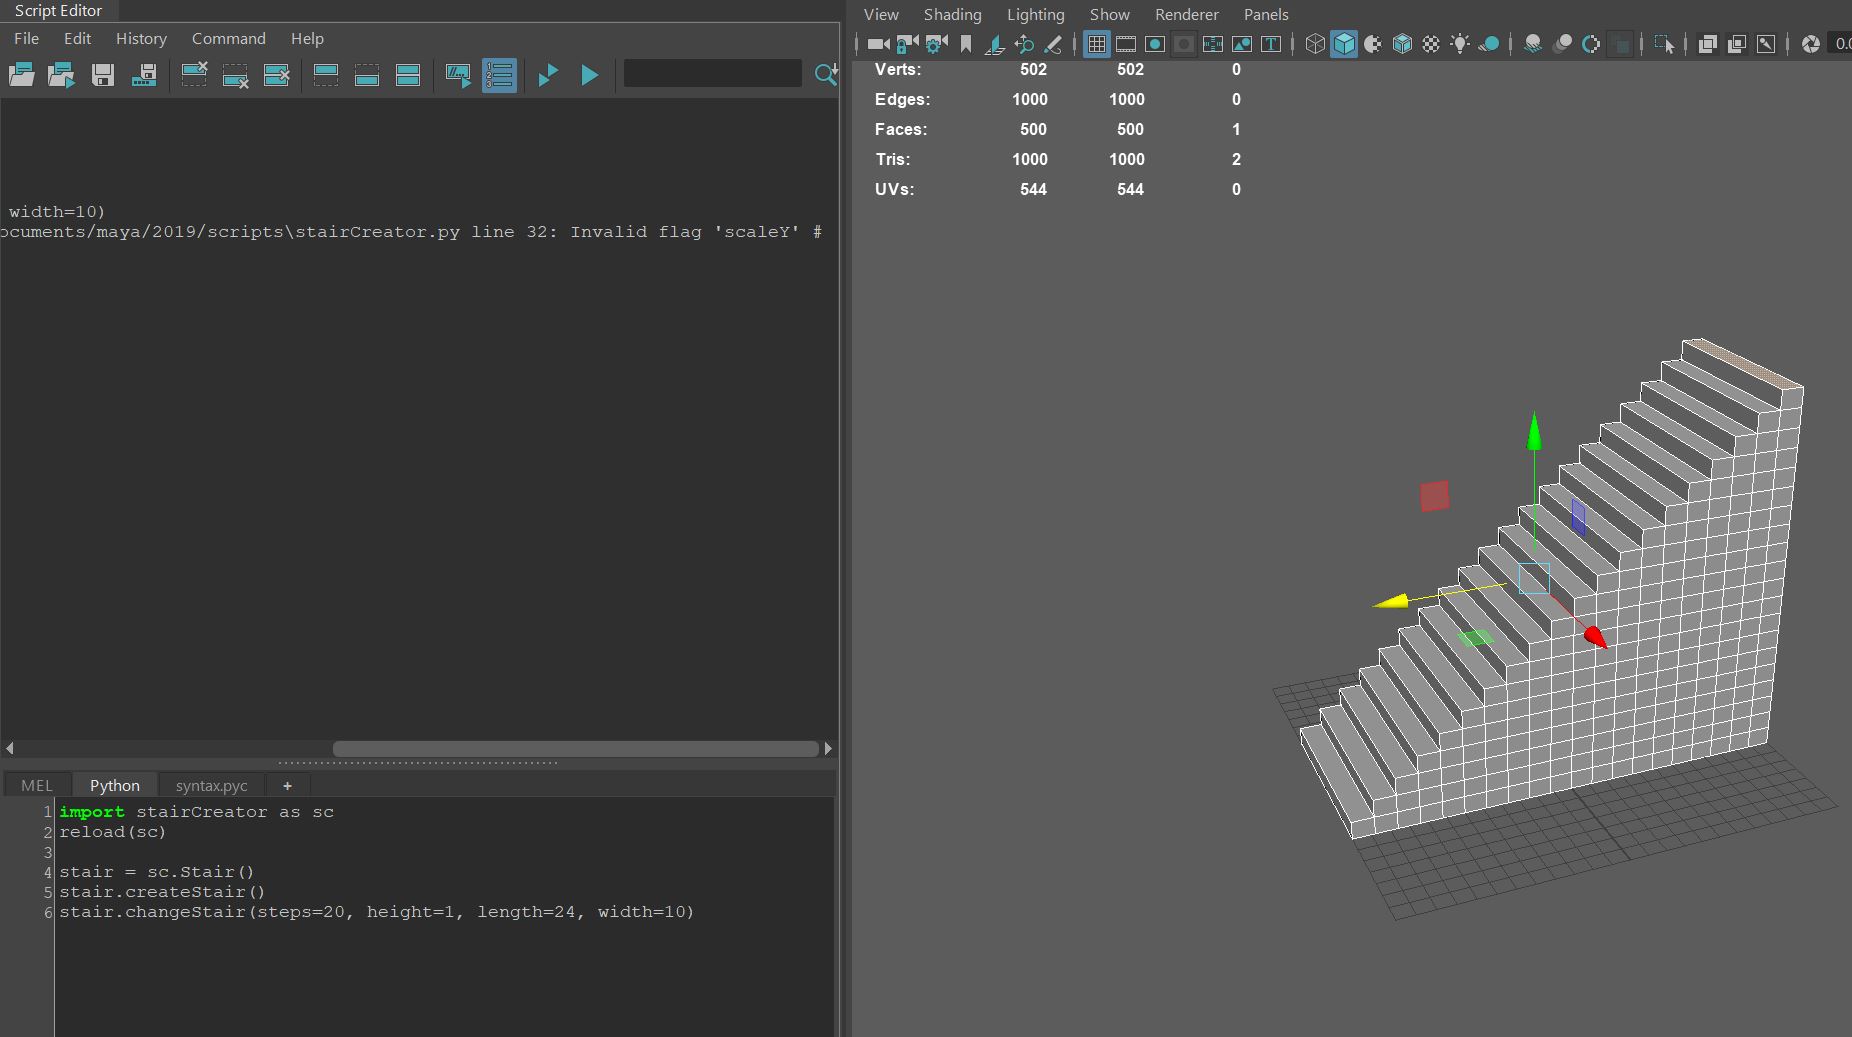 Solved Editing Staircase Attributes After Creation Problem